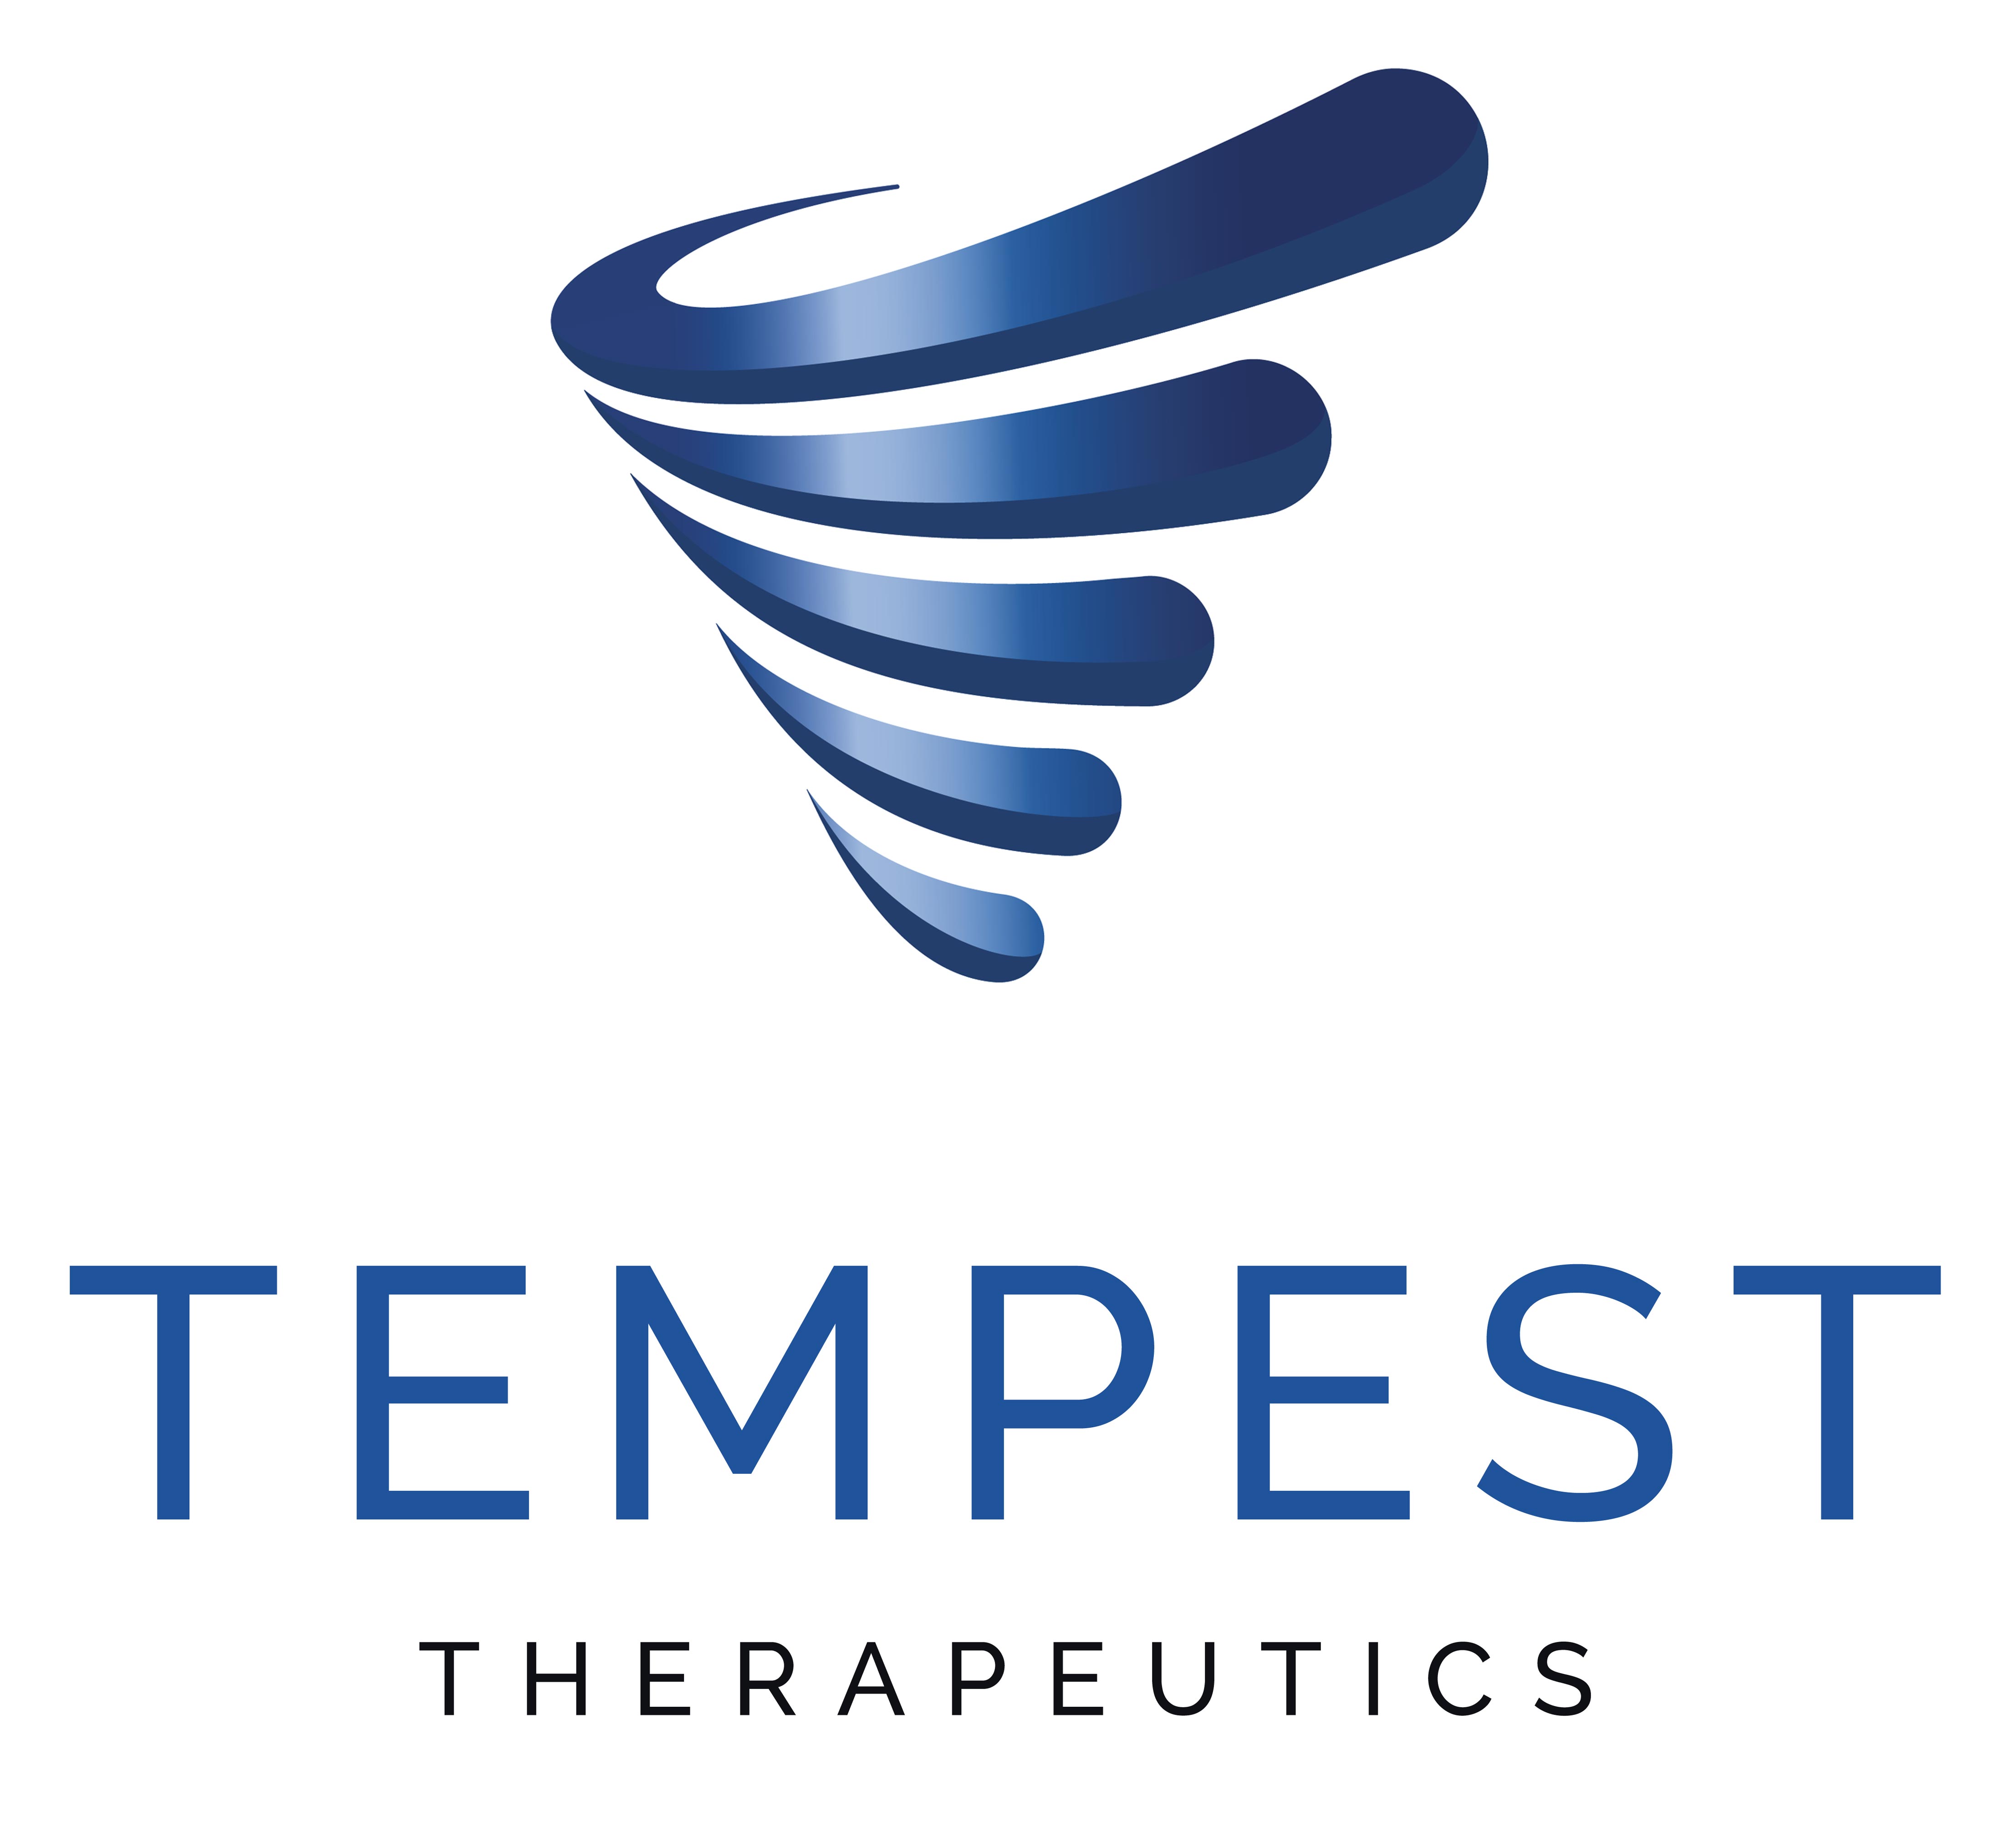 Tempest to Report Early Results from Global Randomized Phase 1b/2 Combination Study of TPST-1120 in First-Line Hepatocellular Carcinoma